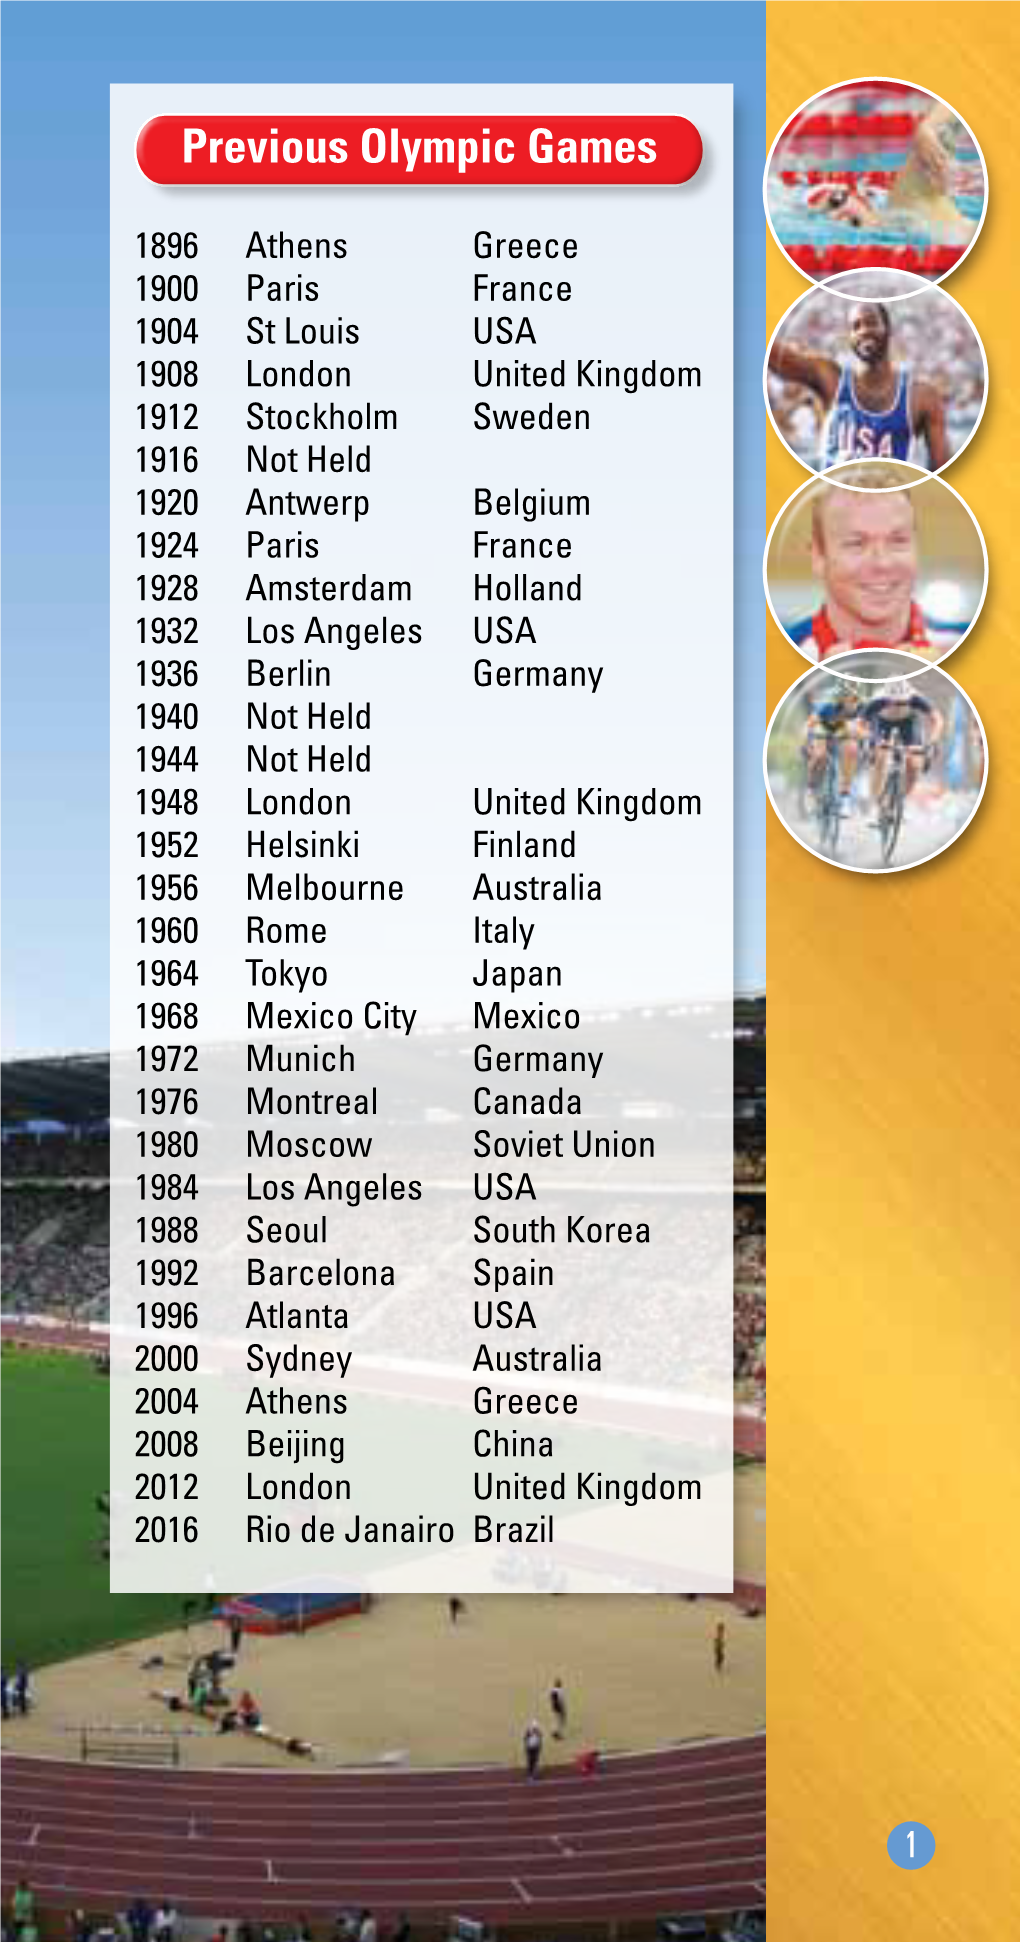 Previous Olympic Games